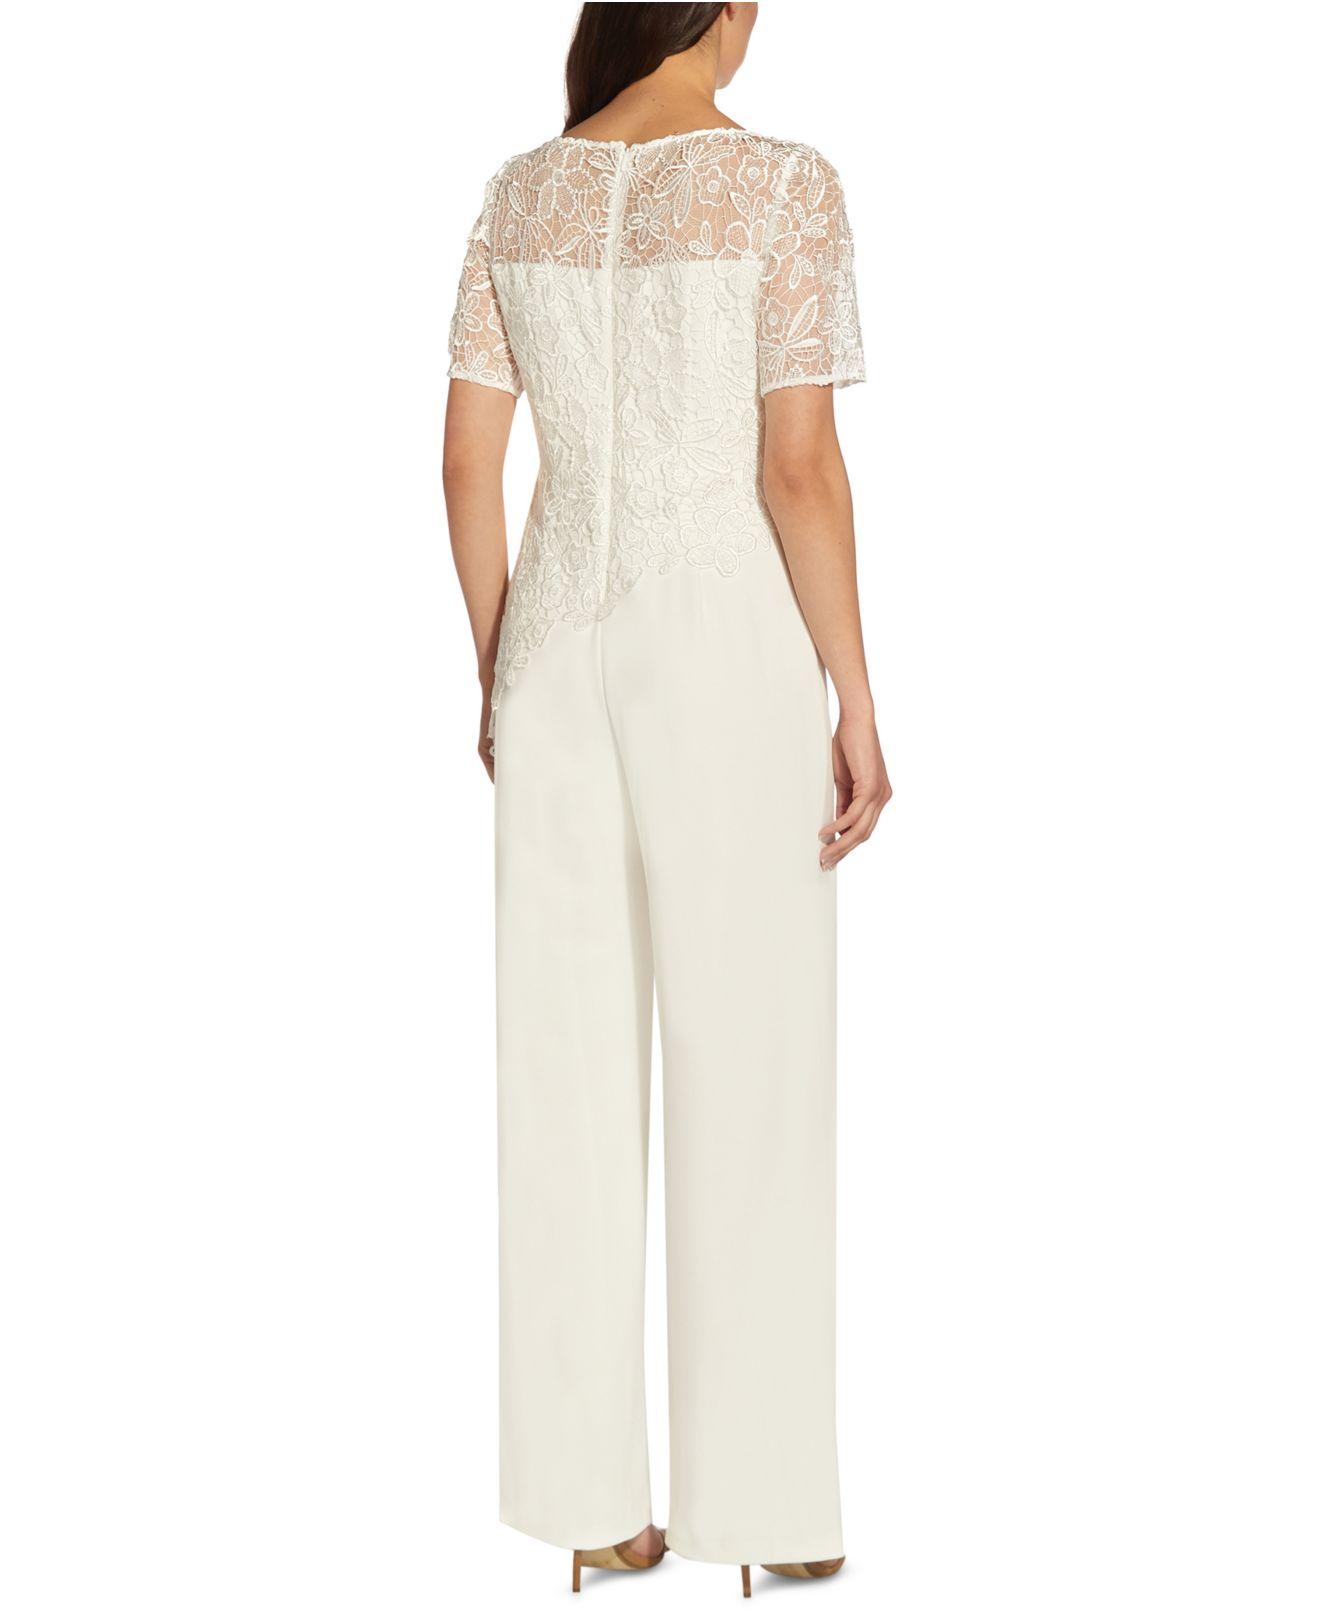 Adrianna Papell Lace-top Jumpsuit in White | Lyst